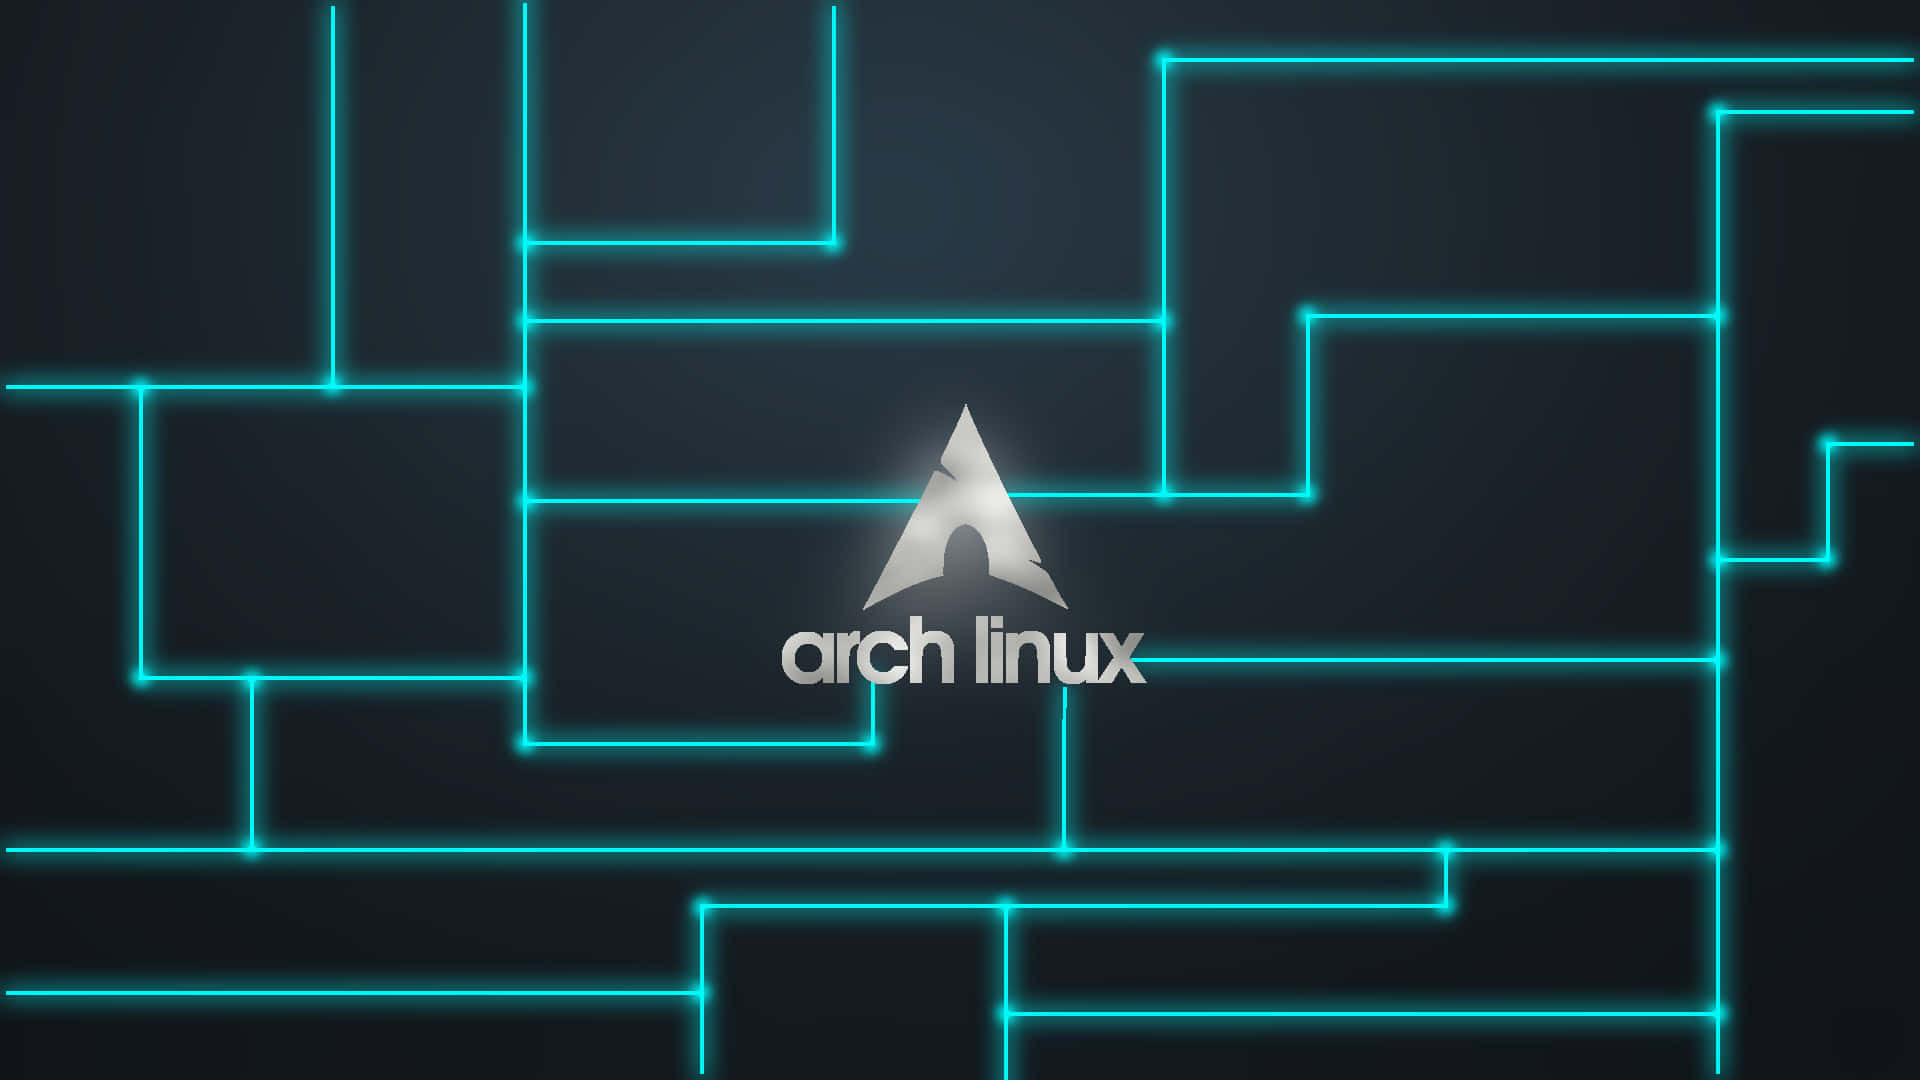 Arch Linux 1080P 2k 4k HD wallpapers backgrounds free download  Rare  Gallery